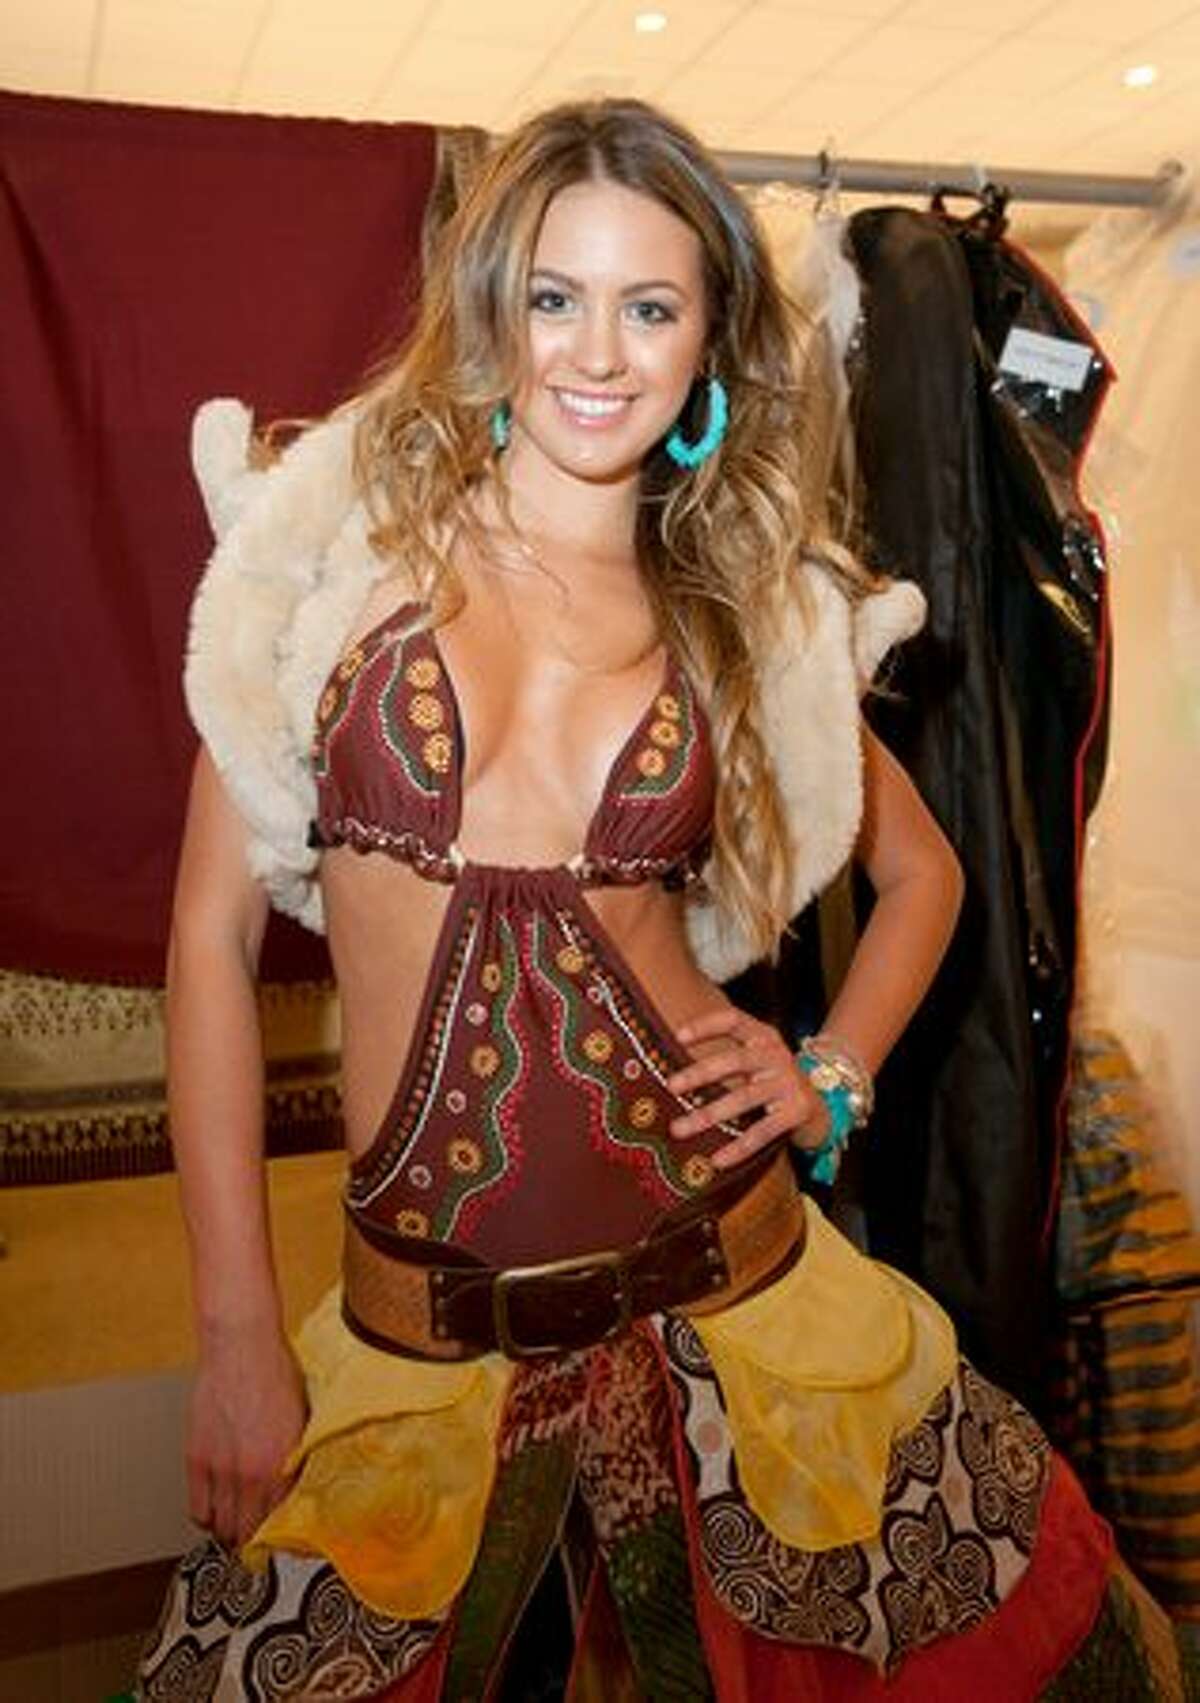 Jesinta Campbell, Miss Australia 2010, offers a closer look at her controversial costume.